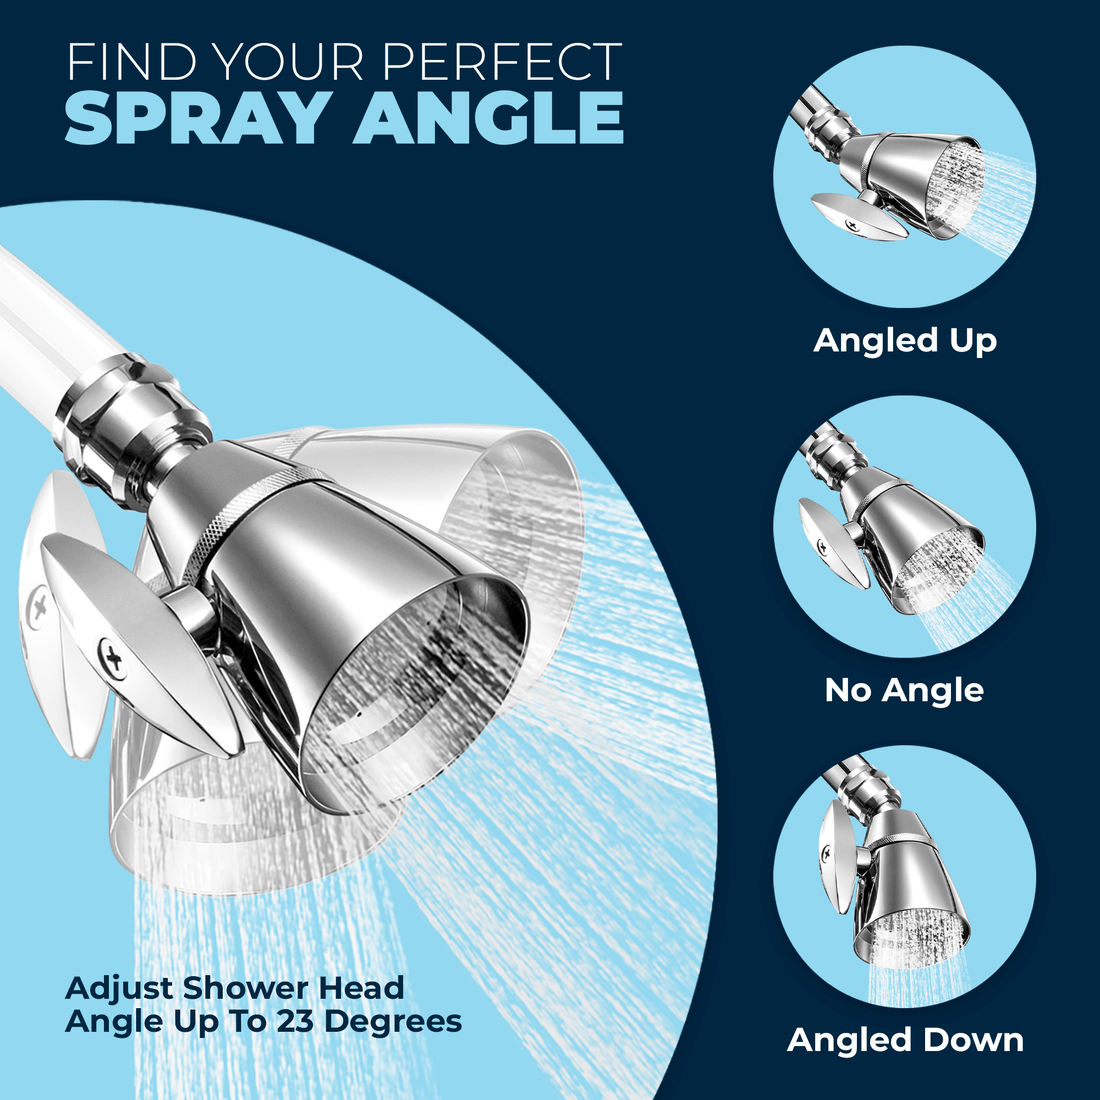 Adjustable Angle Fixed Small Shower Head Adjusts Angle Up to 23 Degrees Chrome / 2.5 - The Shower Head Store